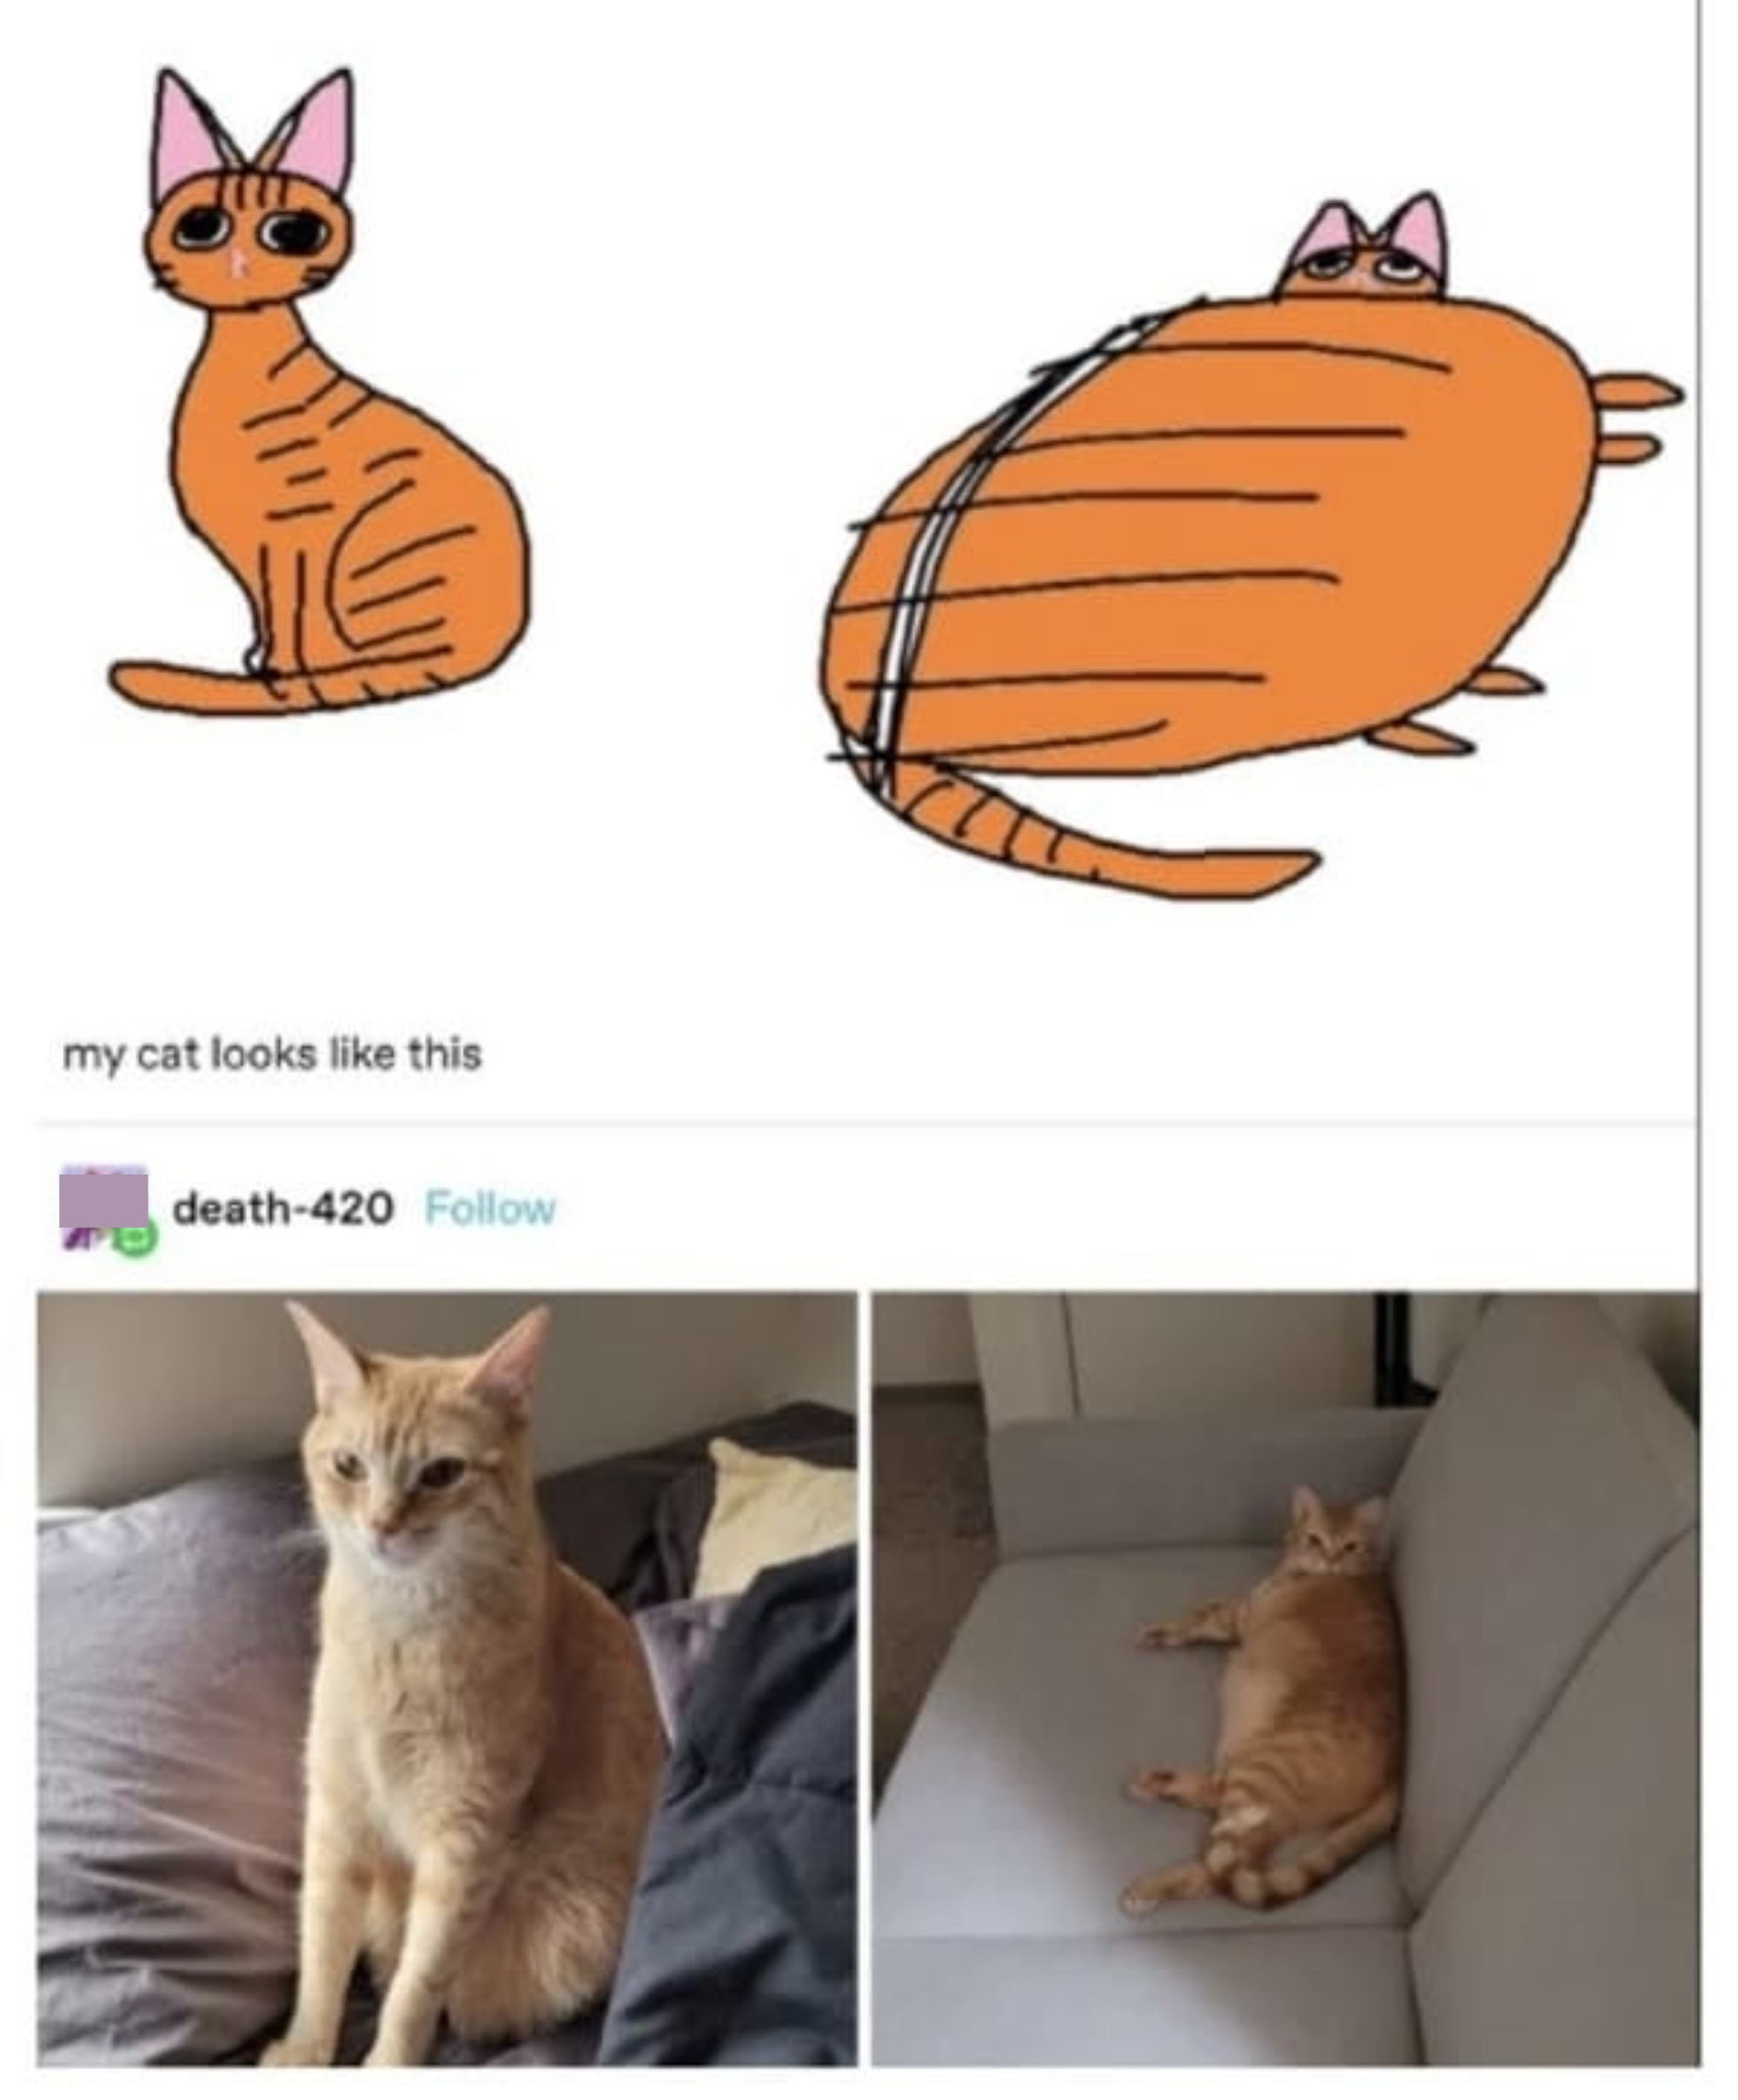 Illustration of an orange tabby cat sitting up and on its side, with caption &quot;my cat looks like this,&quot; and then photo of an orange tabby in the same positions